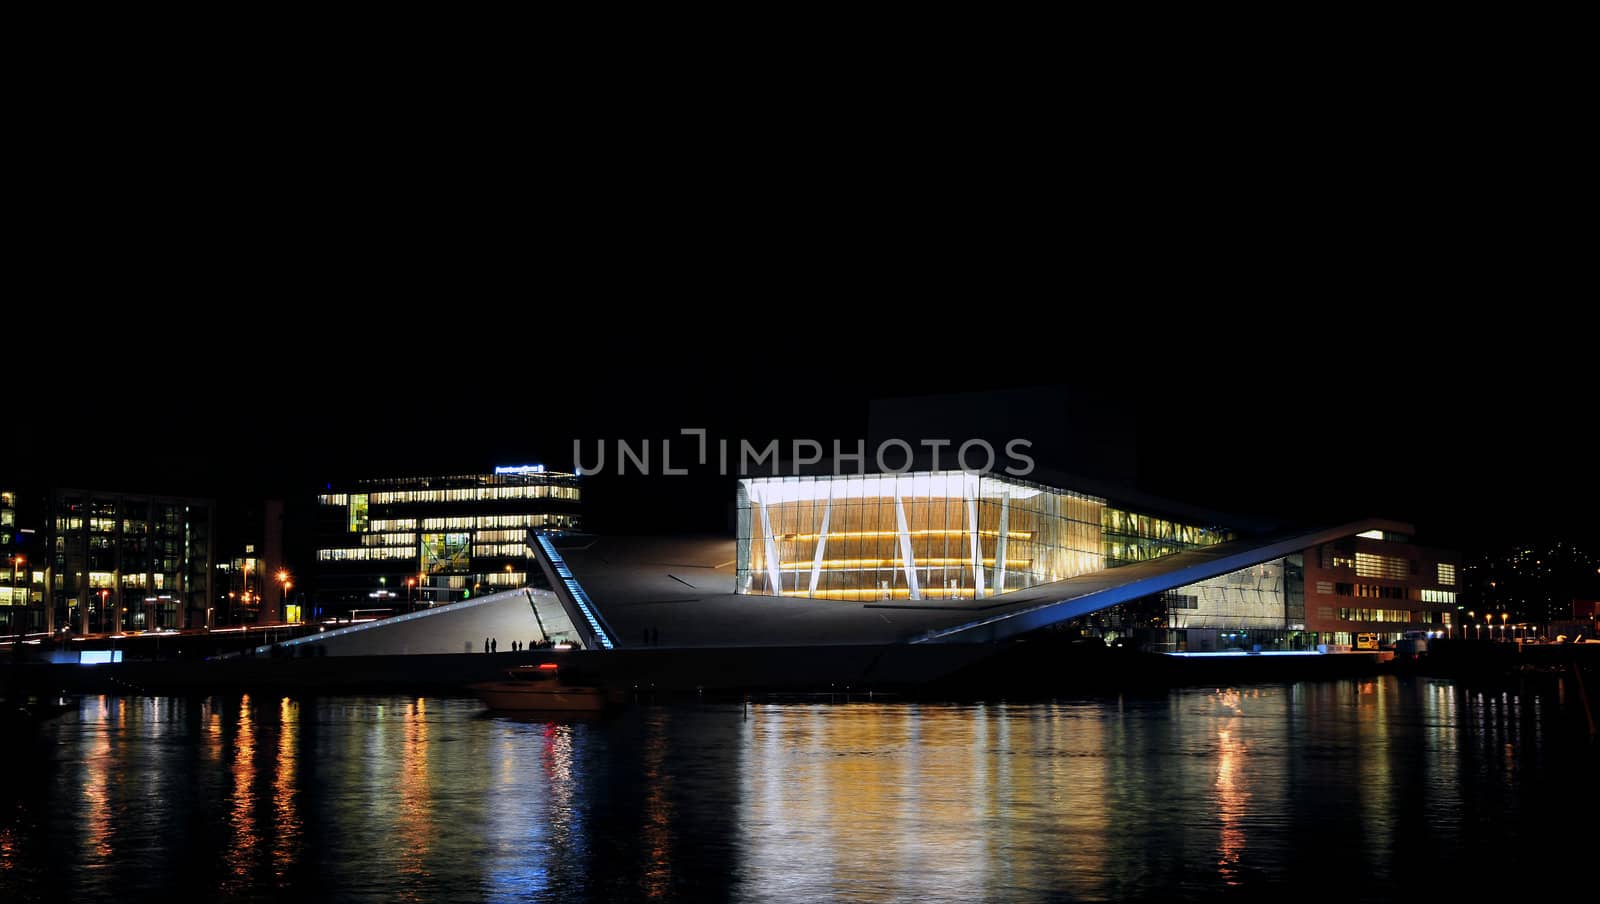 New opera house in Oslo by night